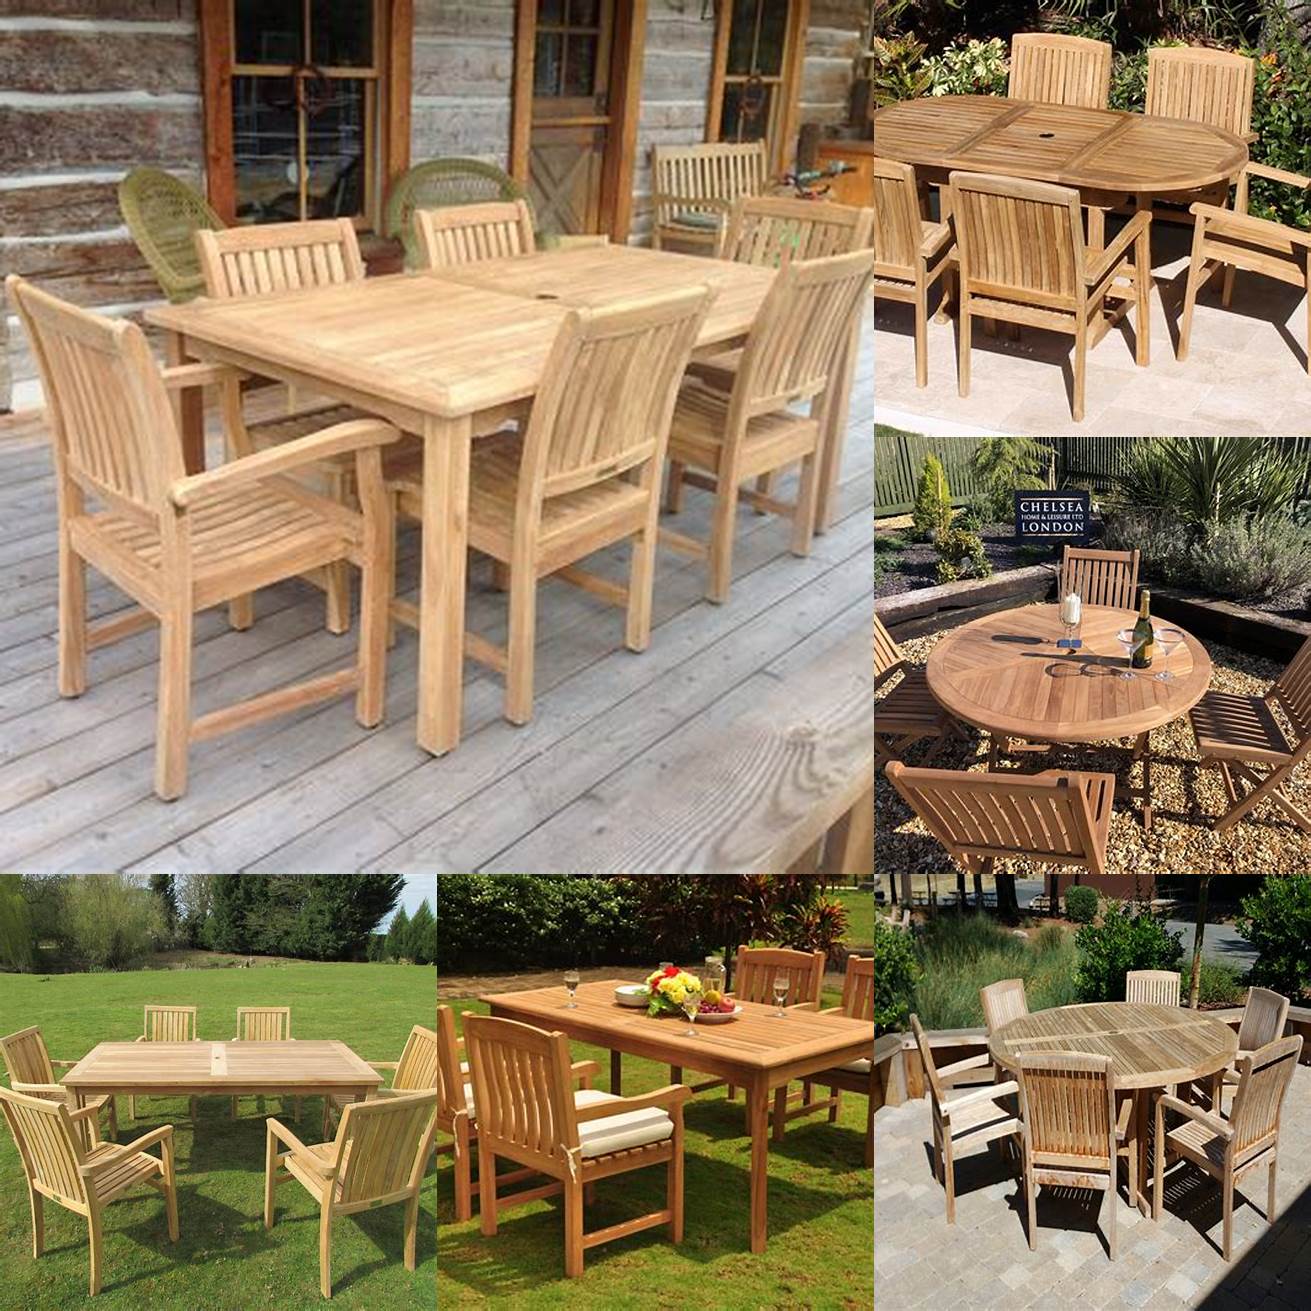 Teak furniture in different environments